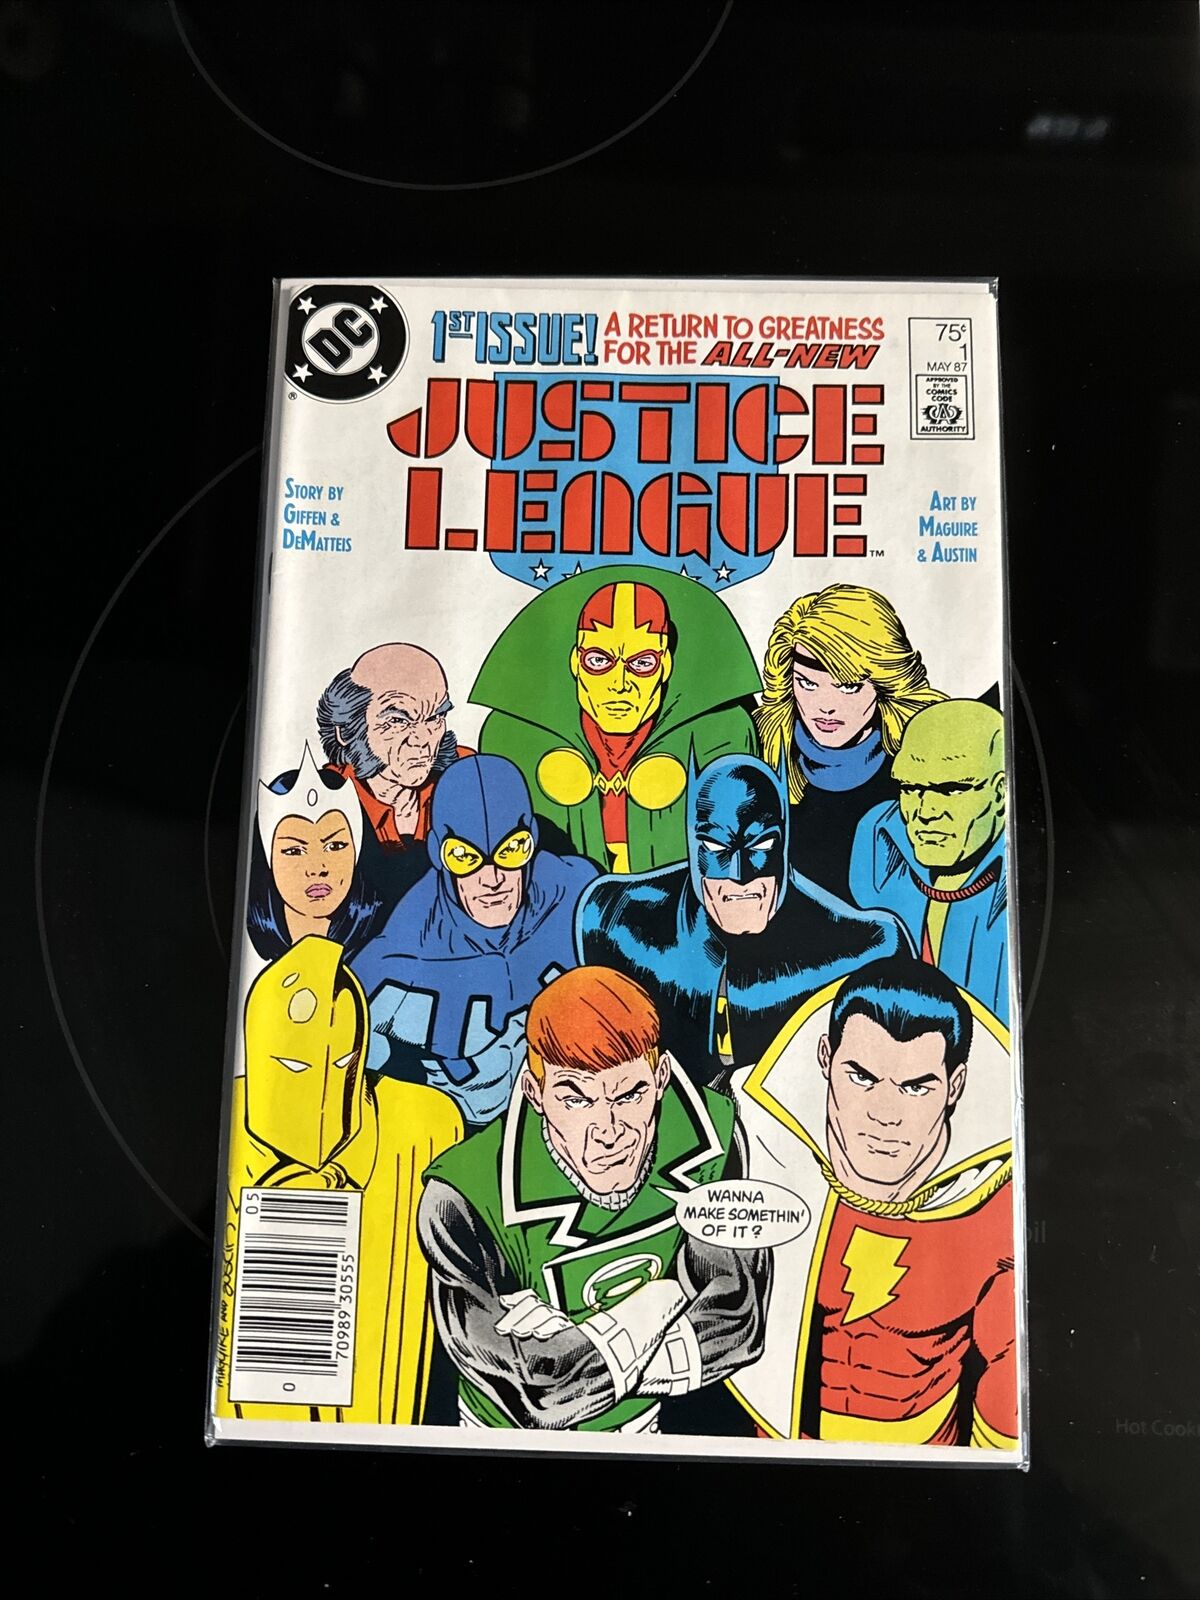 NEAL ADAMS SIGNED Green Arrow Green Lantern Justice League #1 Must Haves